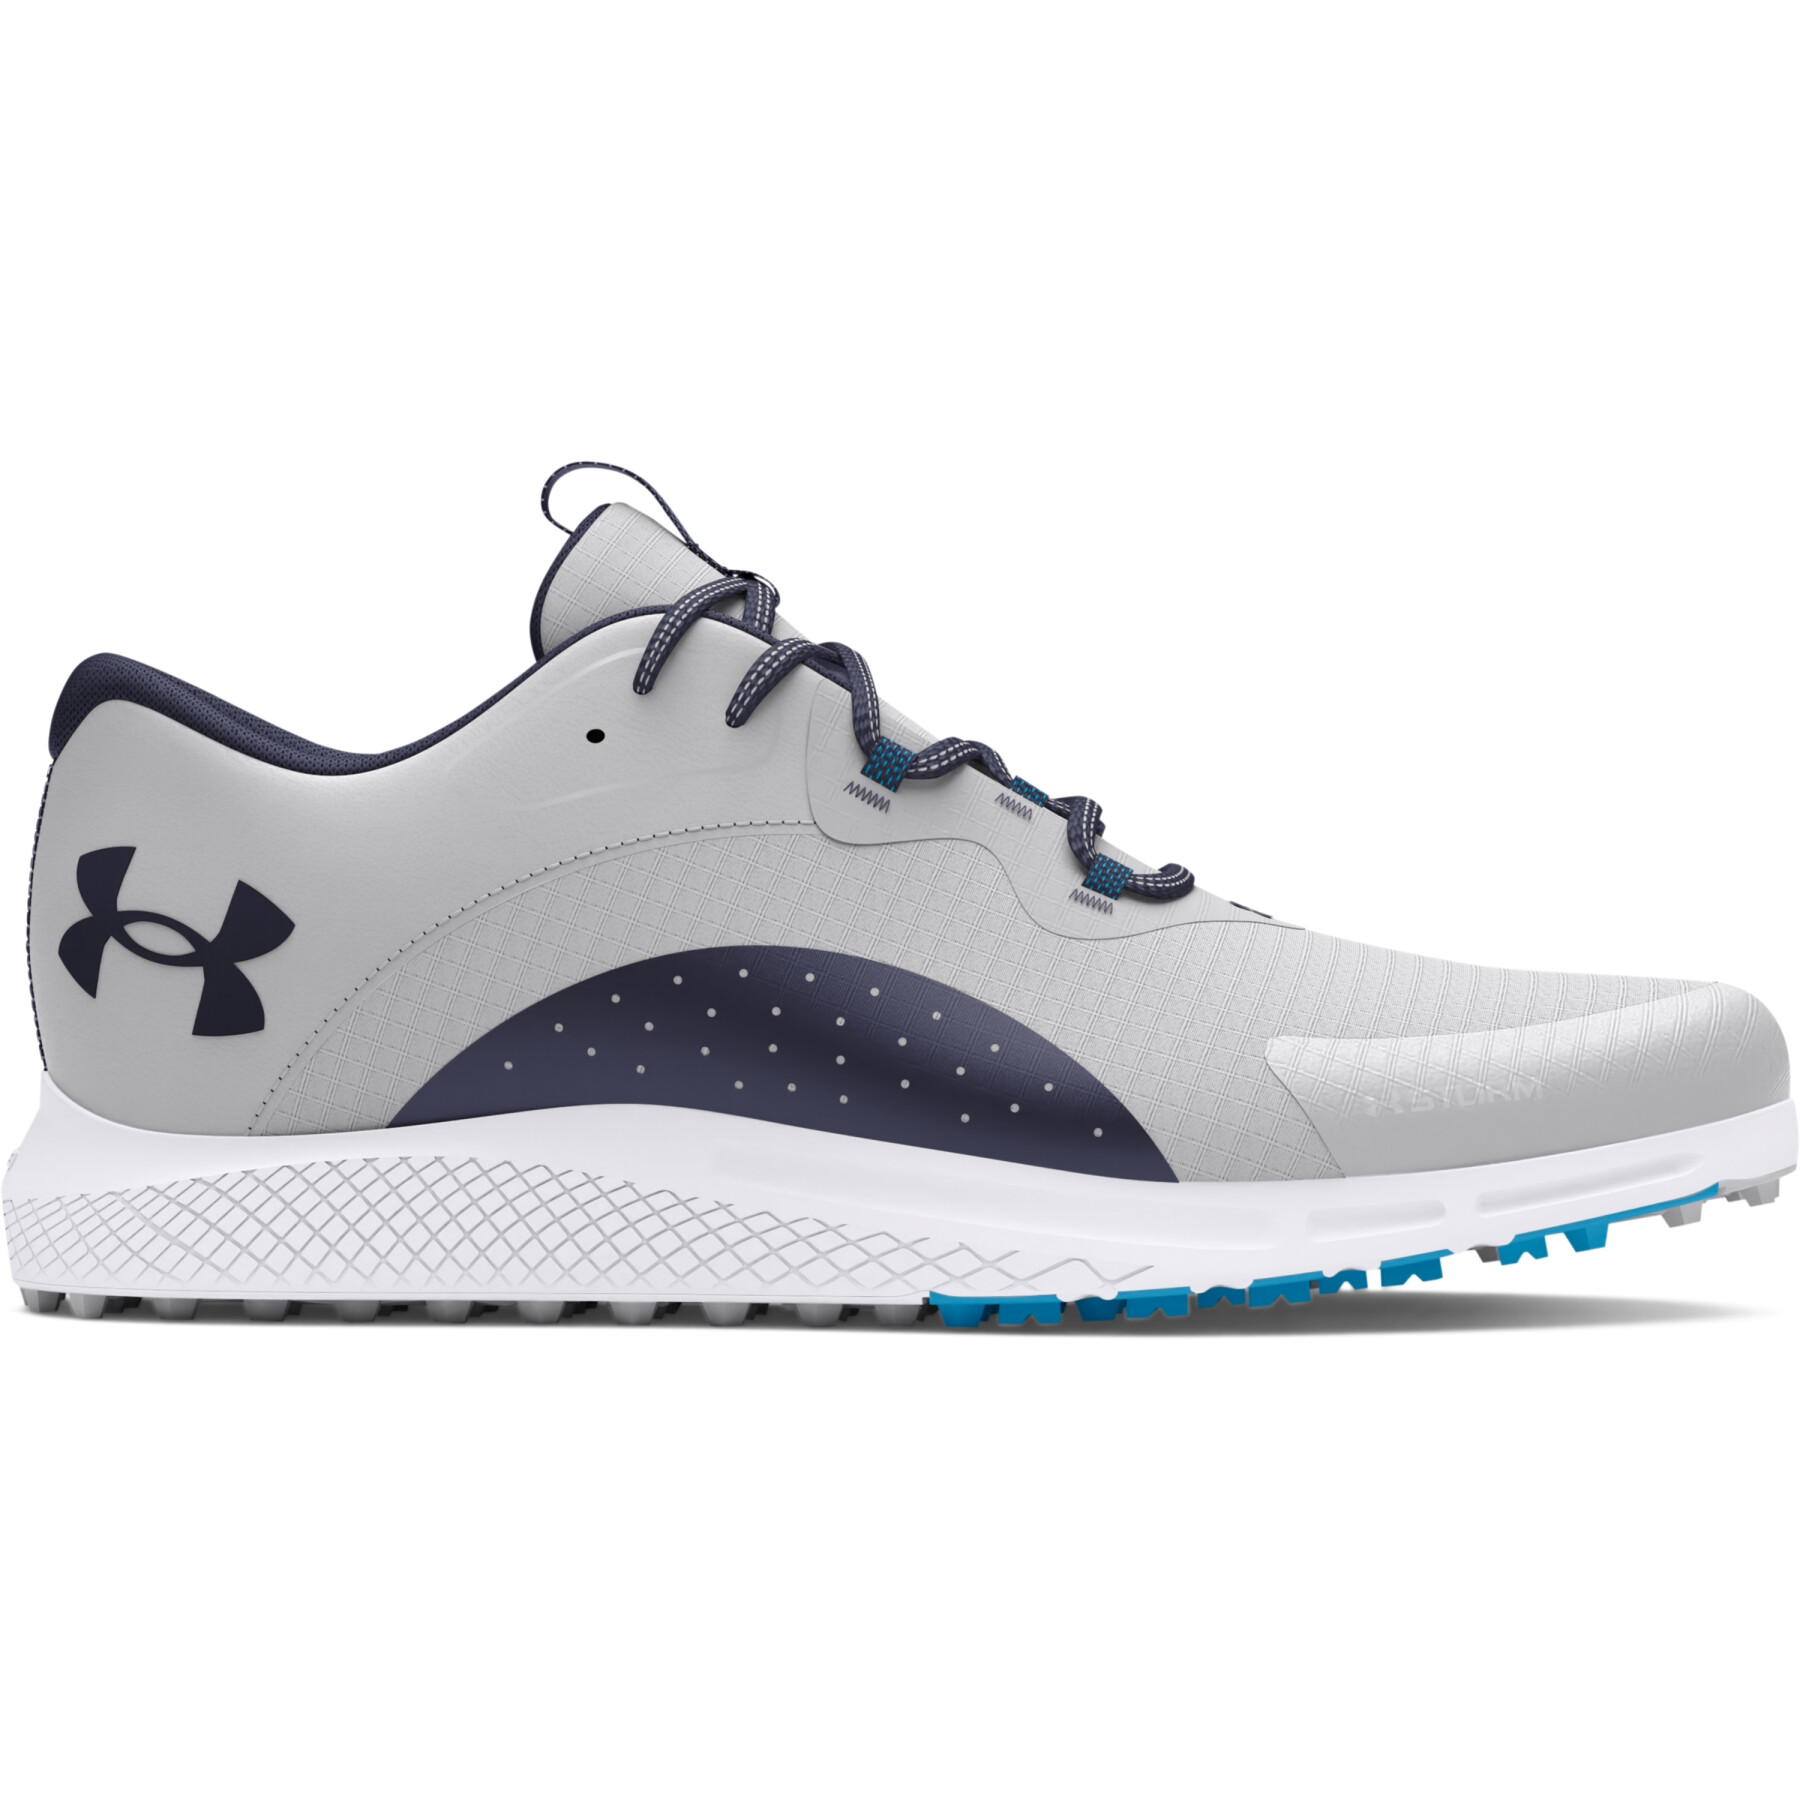 Golf shoes Under Armour Charged Draw 2 SL